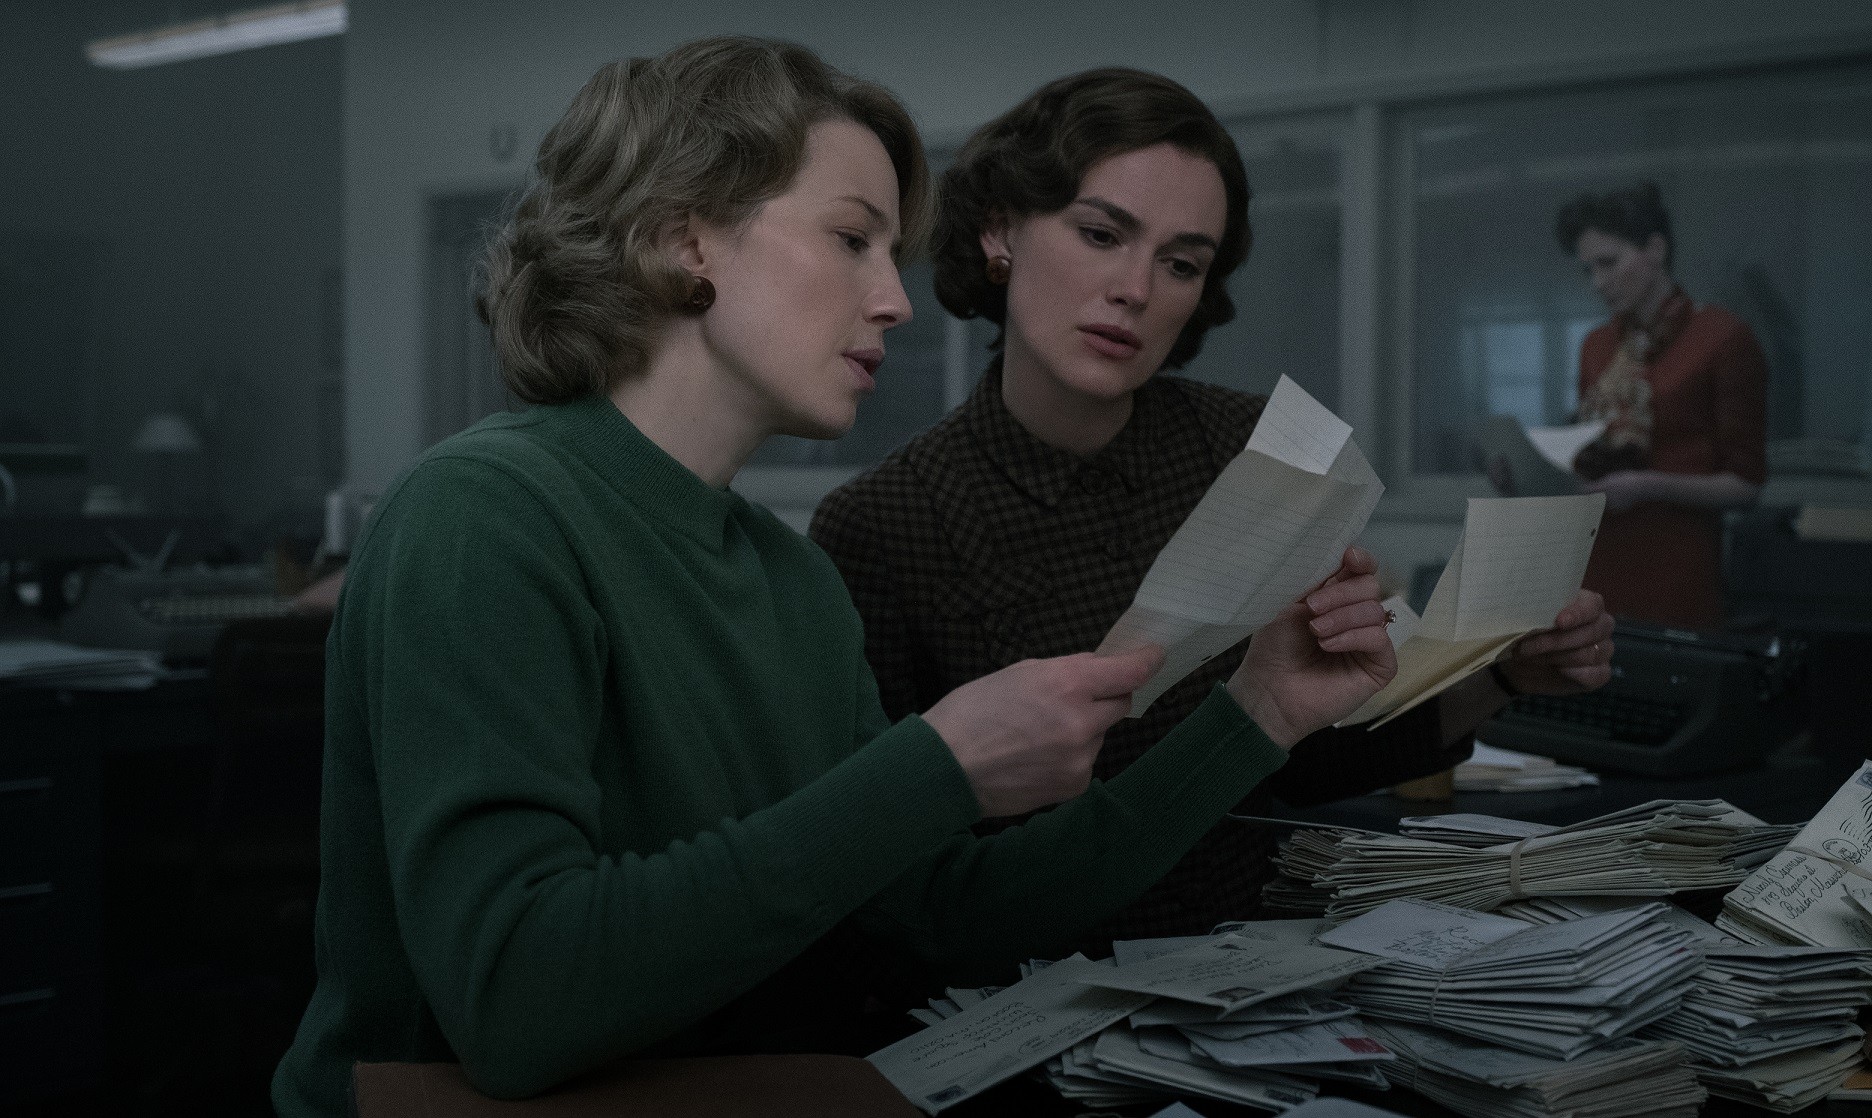 Boston Strangler Keira Knightley and Carrie Coon’s True Crime Movie